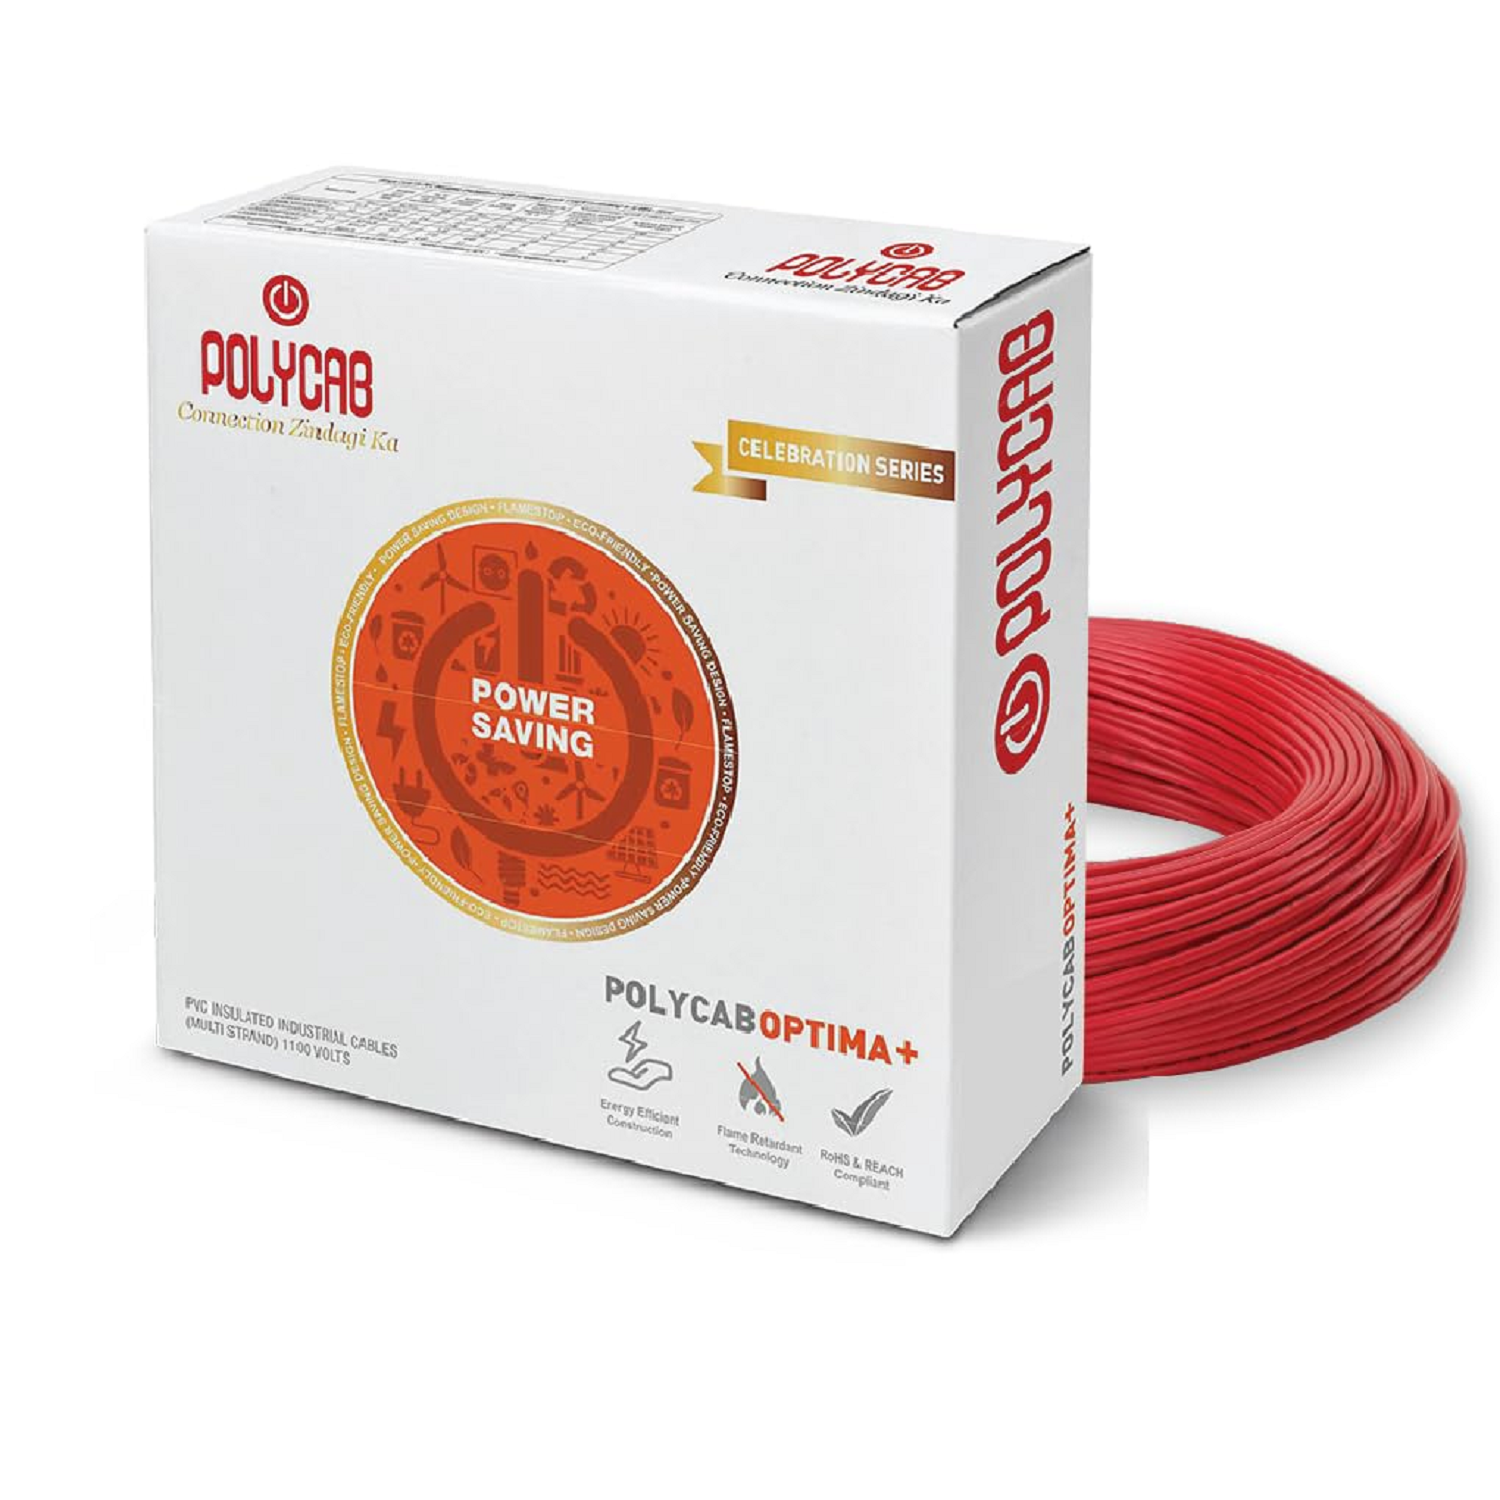 Polycab Optima Plus FR-LF 4.0 SQ-MM, 90 Meters PVC Insulated Copper Wire Single Core (Red)